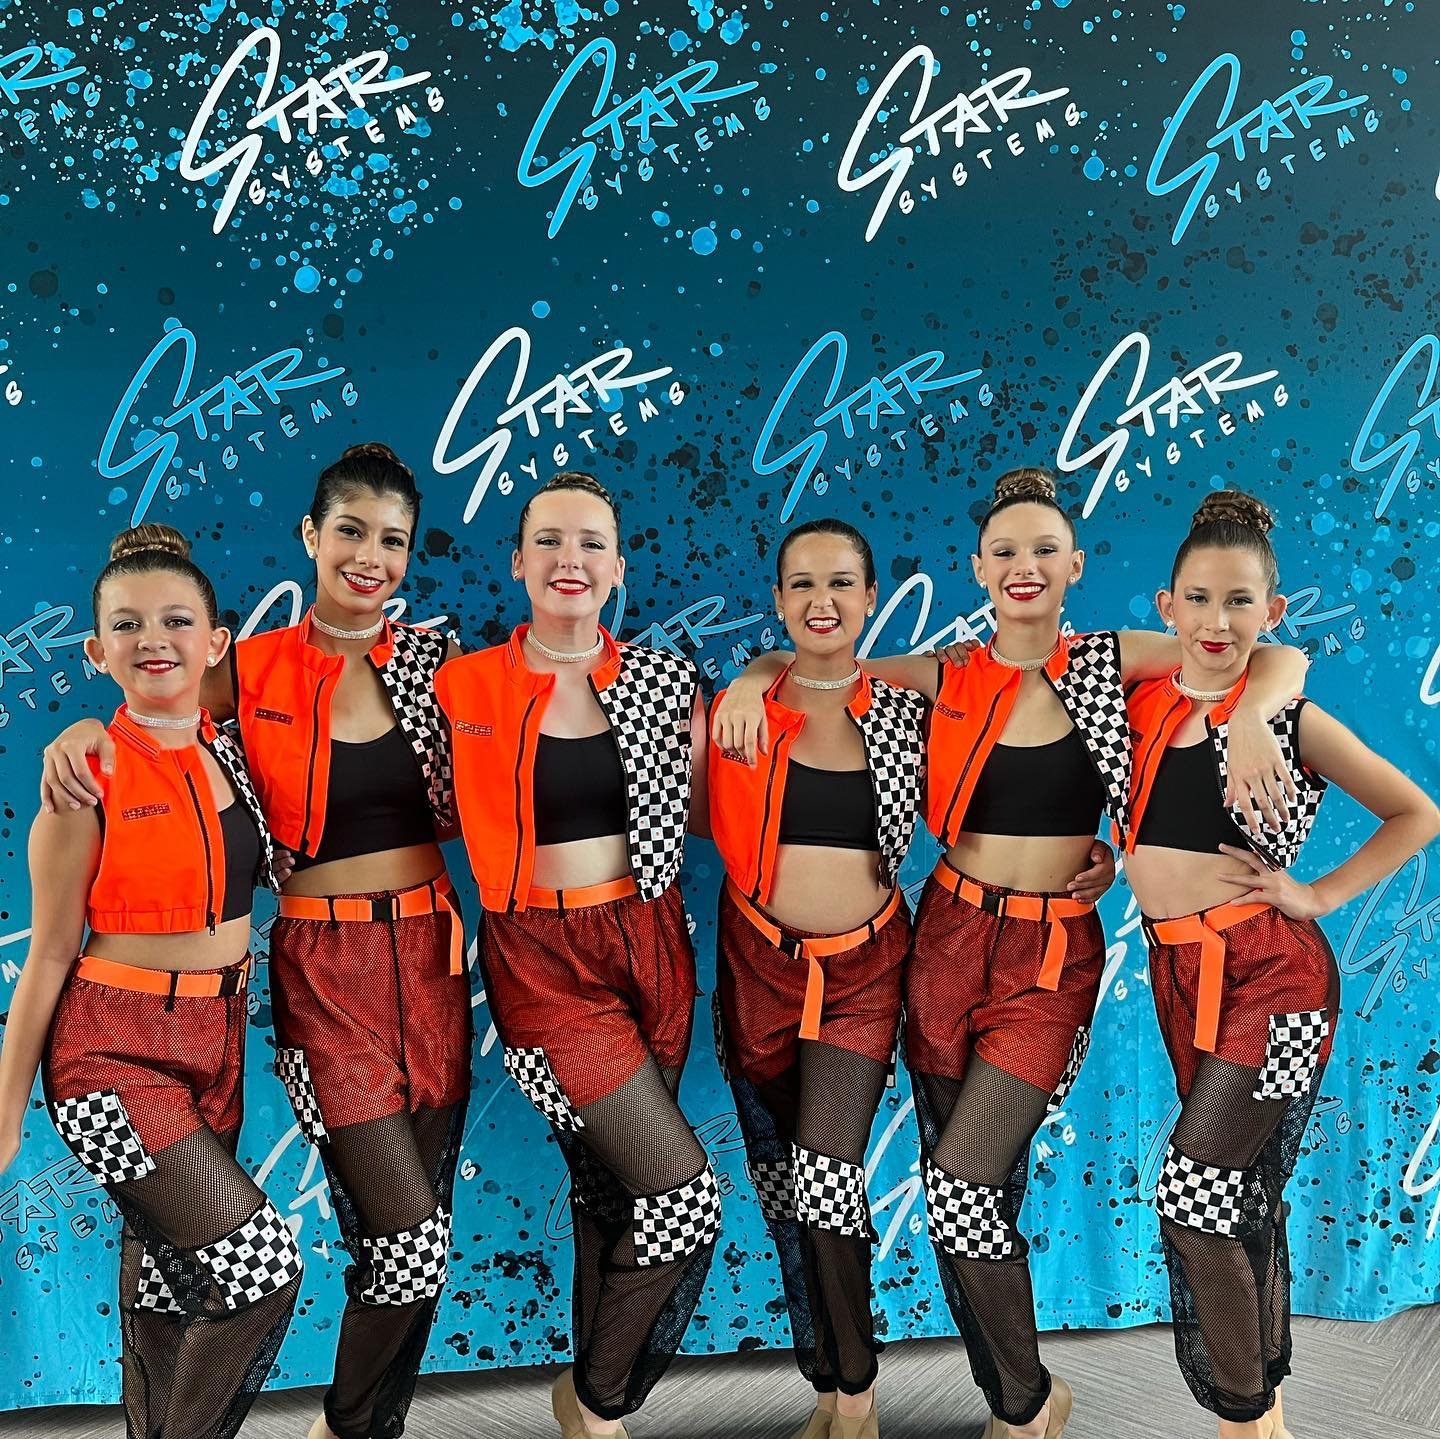 We had an AMAZING weekend at Star Systems! 

We had a busy weekend in Lakeland and these girls ROCKED the stage! We are so proud of their continuous growth throughout the season! Check back tomorrow to see the results from this weekend. There&rsquo;s